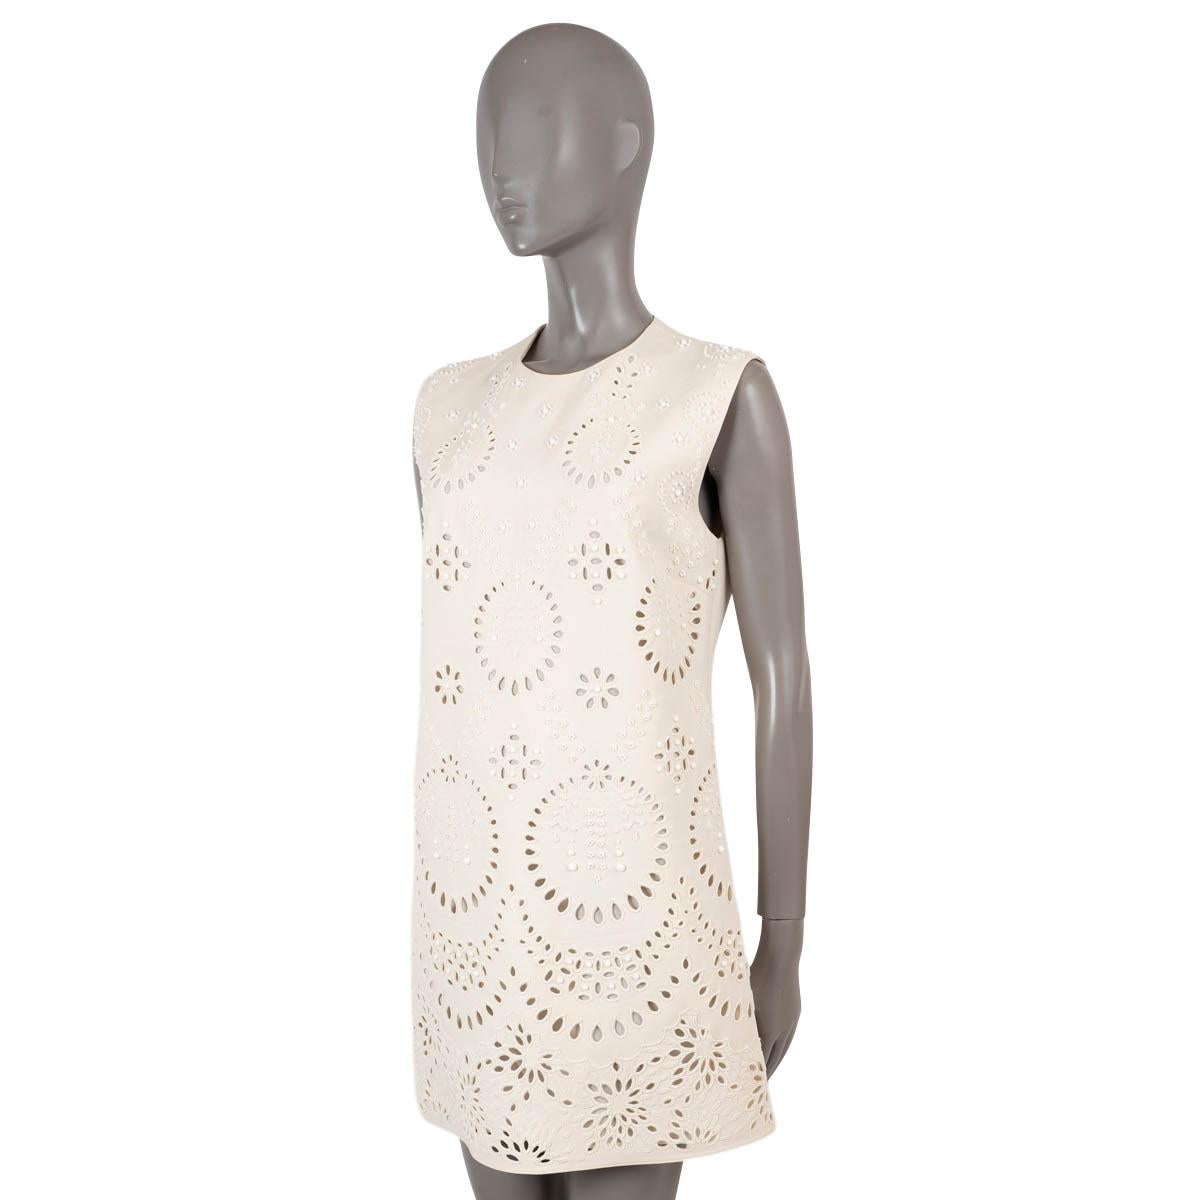 100% authentic Valentino broderie anglaise mini shift dress in cream wool (65%) and silk (35%). Features a round neck. Opens with a zipper in the back and is lined in viscose (with 9% elastane). Has been worn and got altered. Overall in excellent